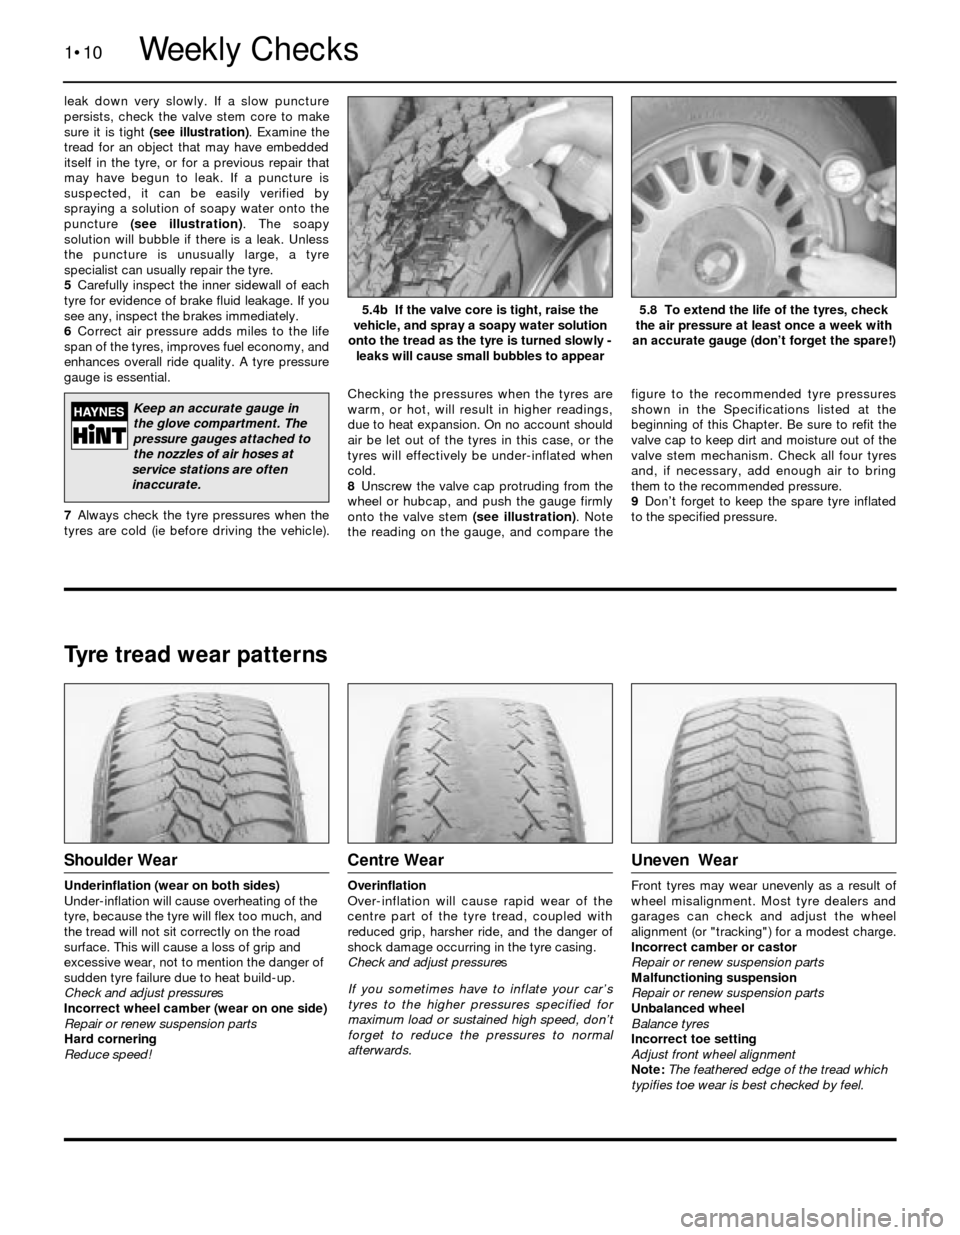 BMW 3 SERIES 1983 E30 Workshop Manual leak down very slowly. If a slow puncture
persists, check the valve stem core to make
sure it is tight (see illustration). Examine the
tread for an object that may have embedded
itself in the tyre, or